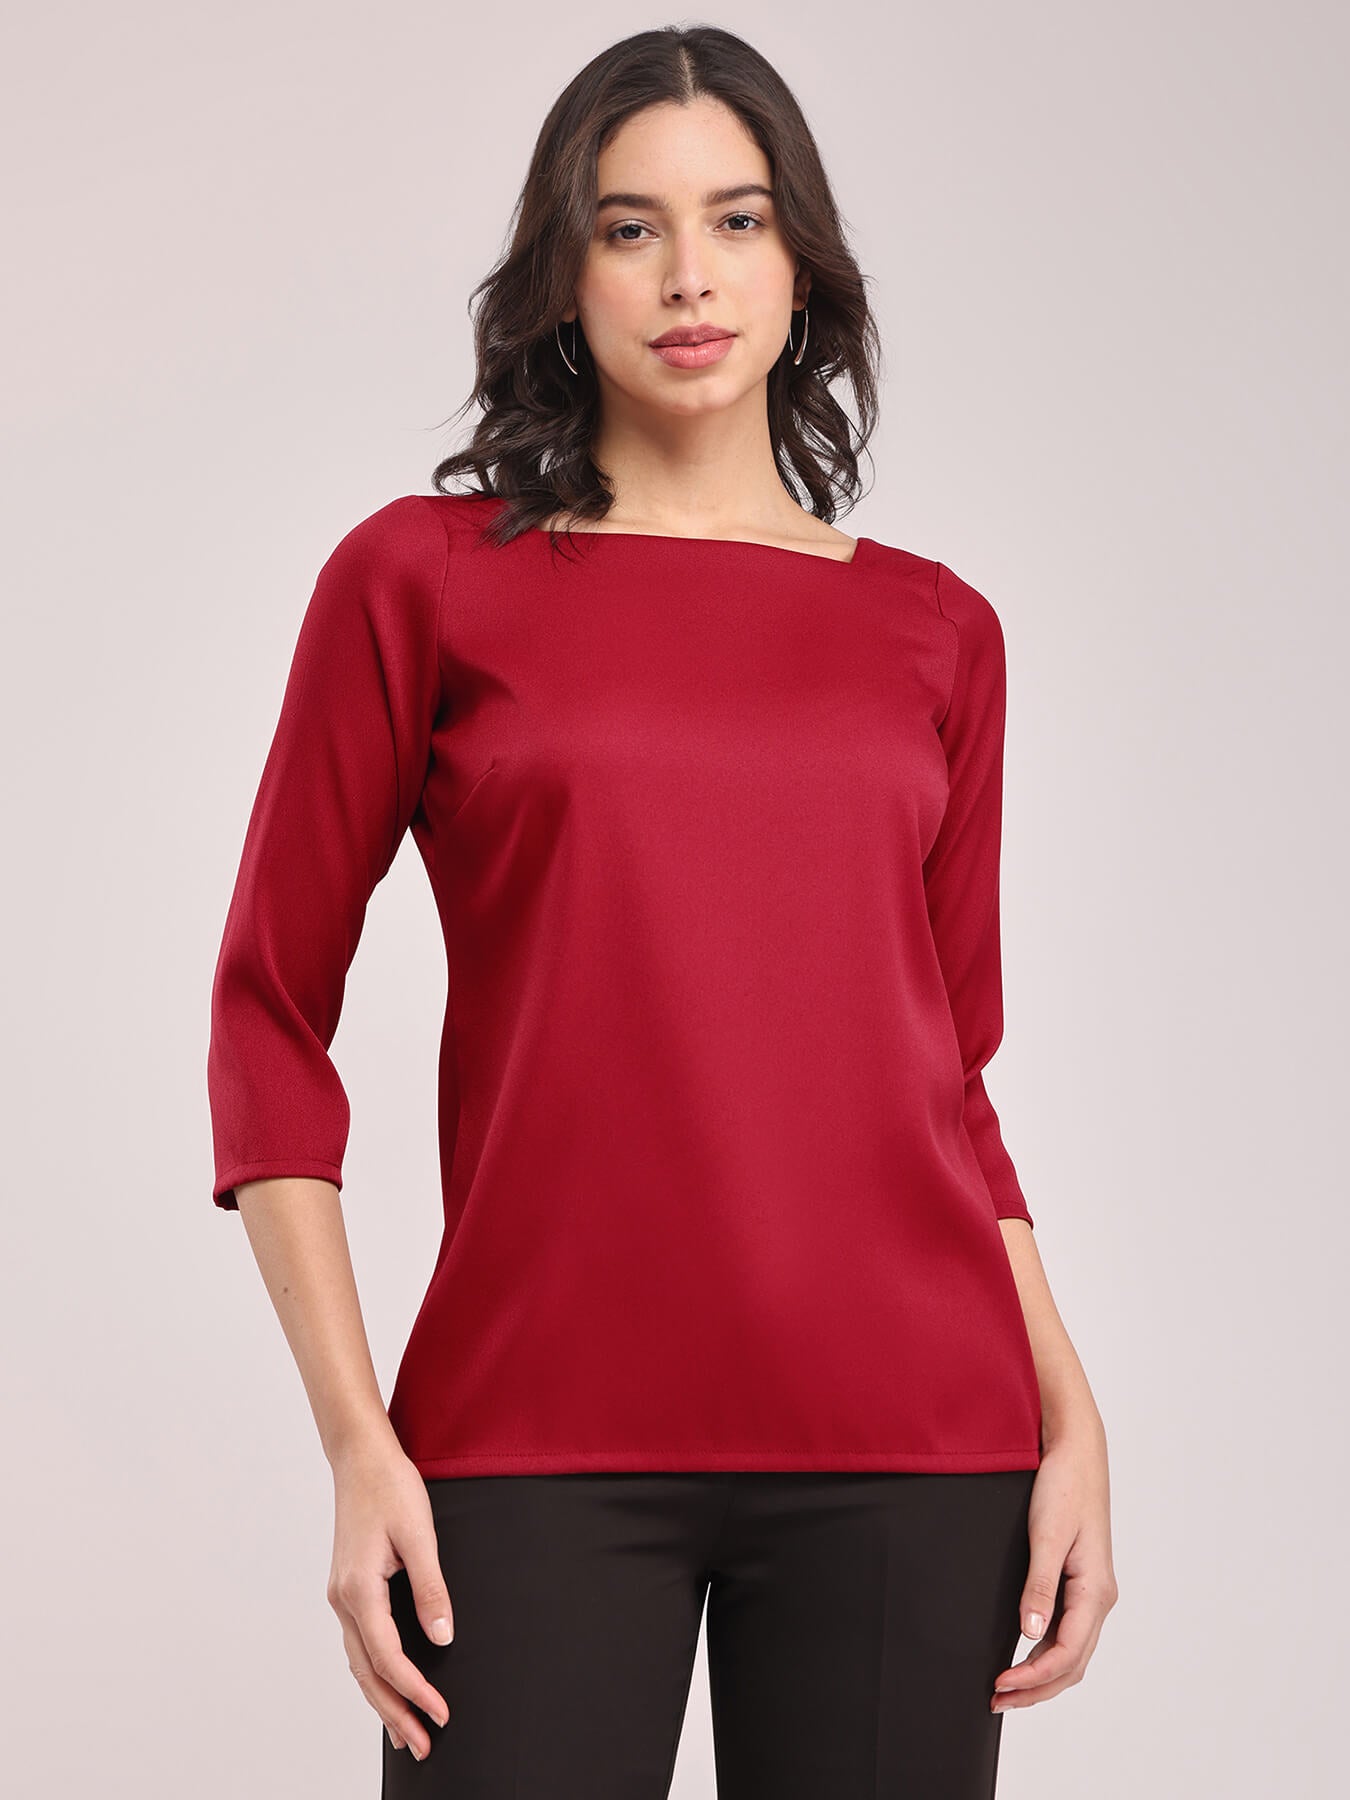 Square Neck Top - Red